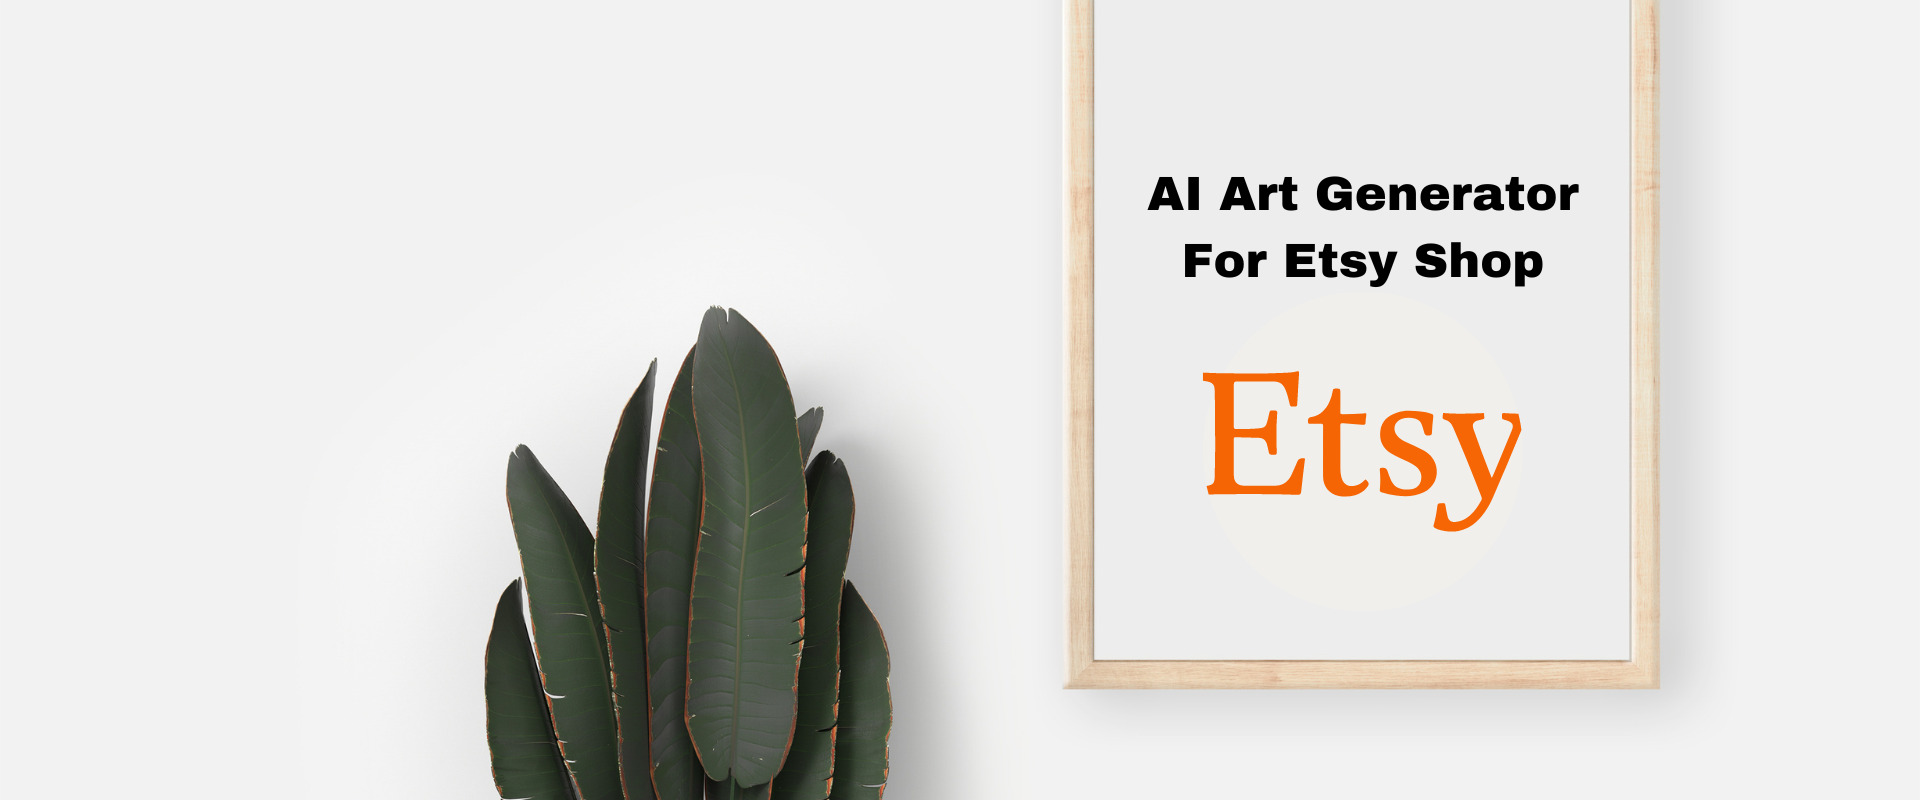 10 AI Art Generator For Etsy Shop – Can You Sell AI Art on Etsy? Answered!